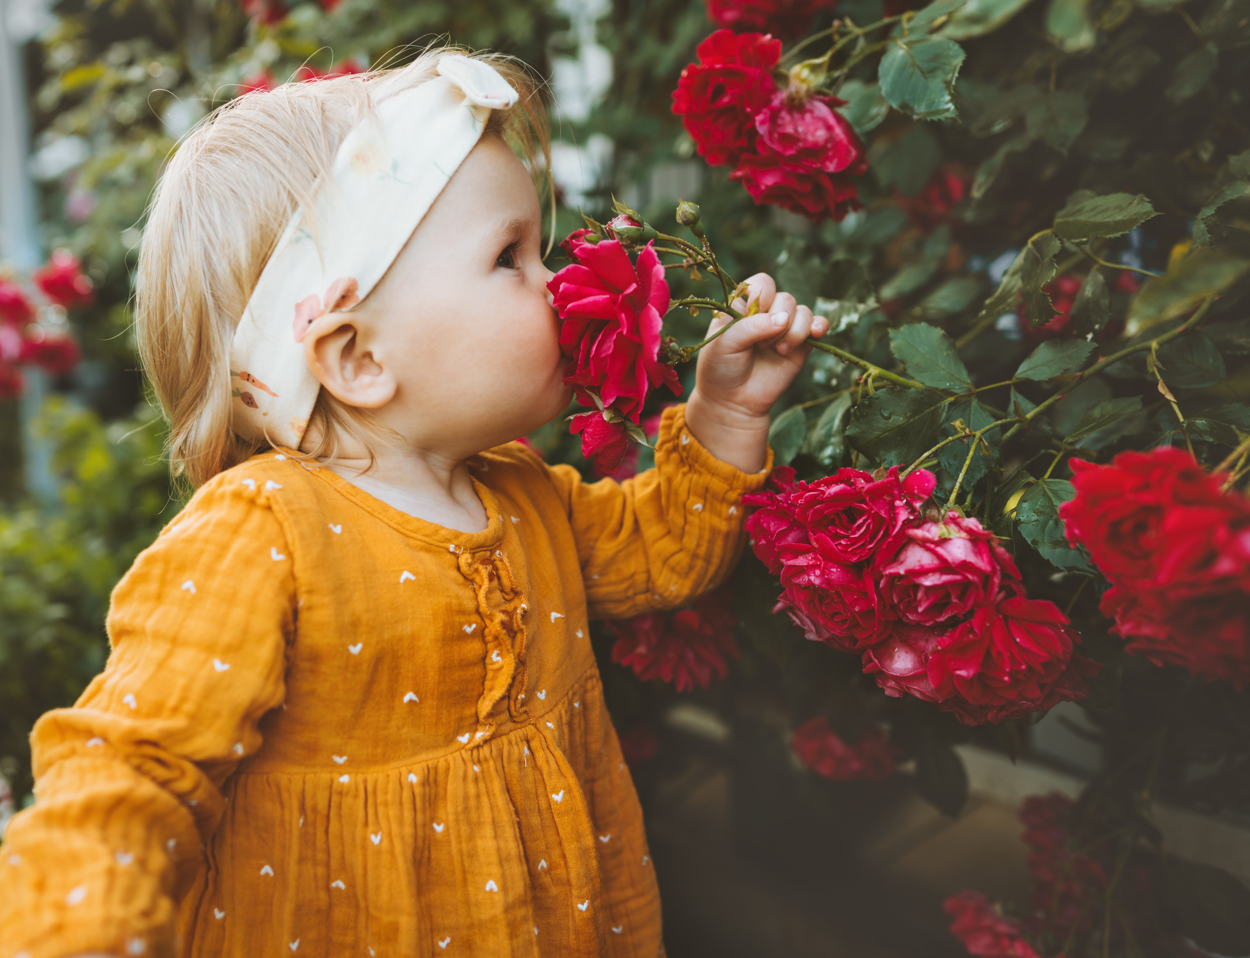 A little girl in a yellow dress holding and smelling roses from a rose bush in a garden.